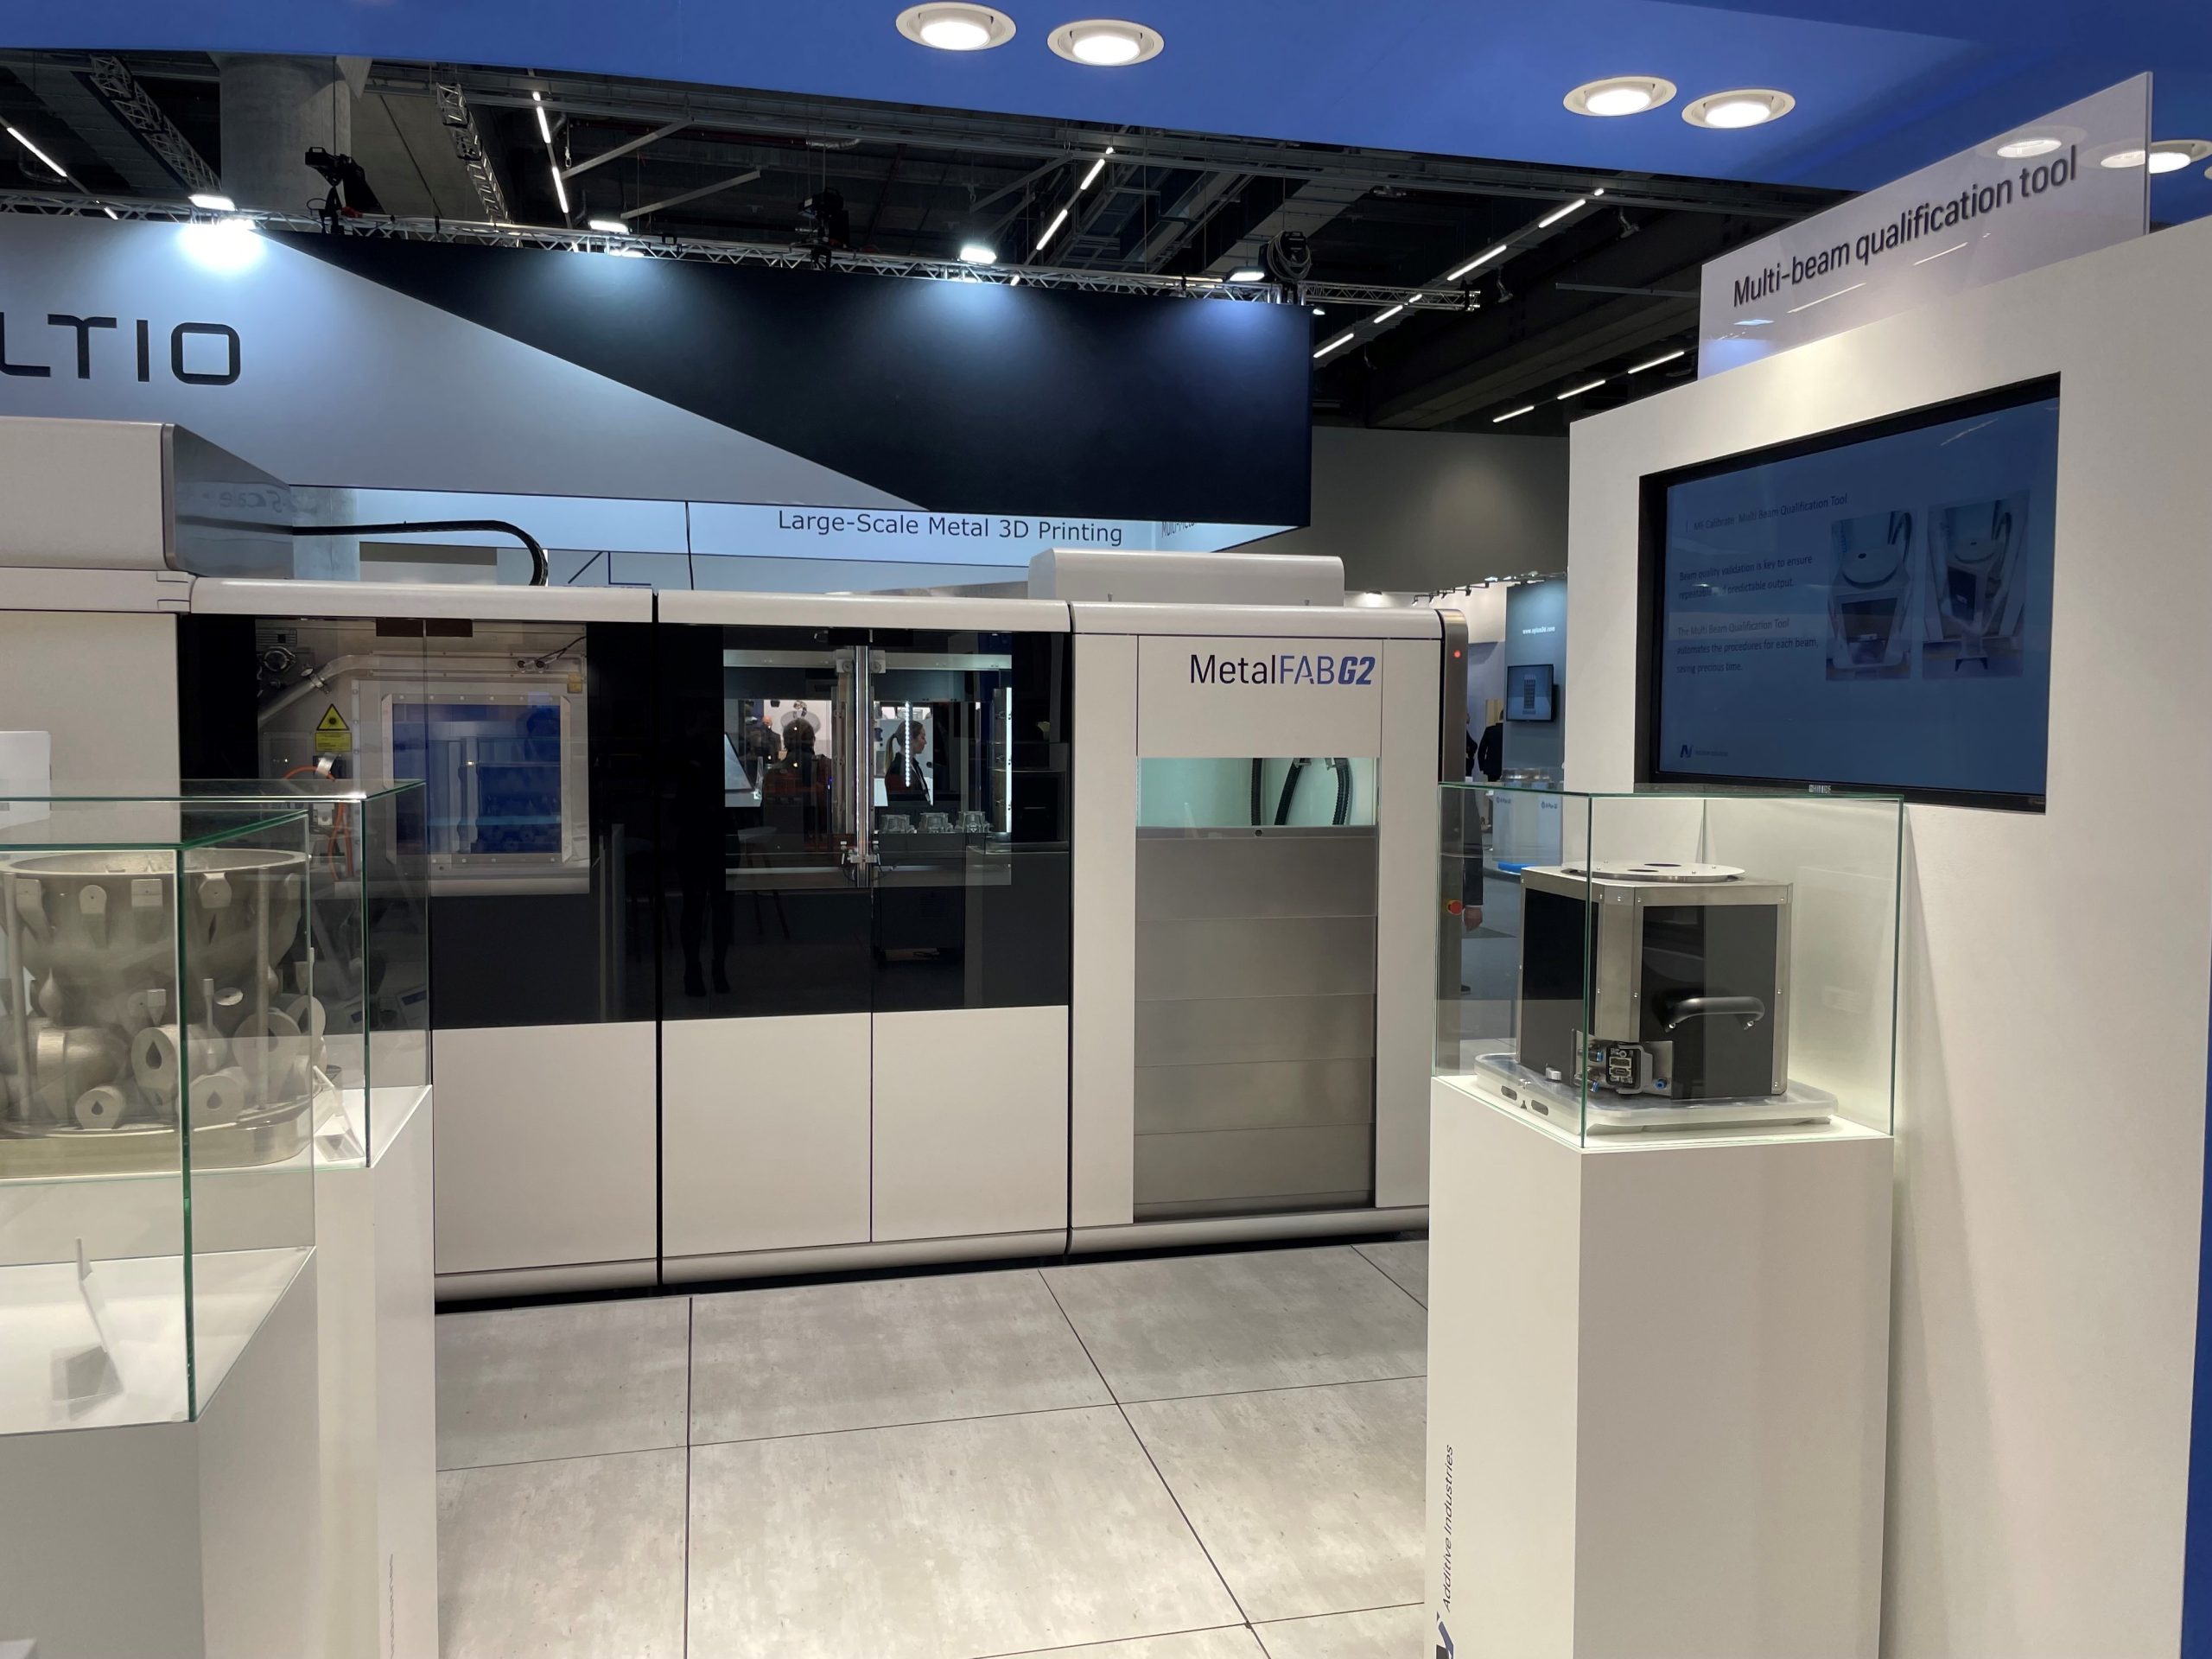 The MetalFAB G2 launched at Additive Industries' Formnext booth. Photo via Additive Industries.